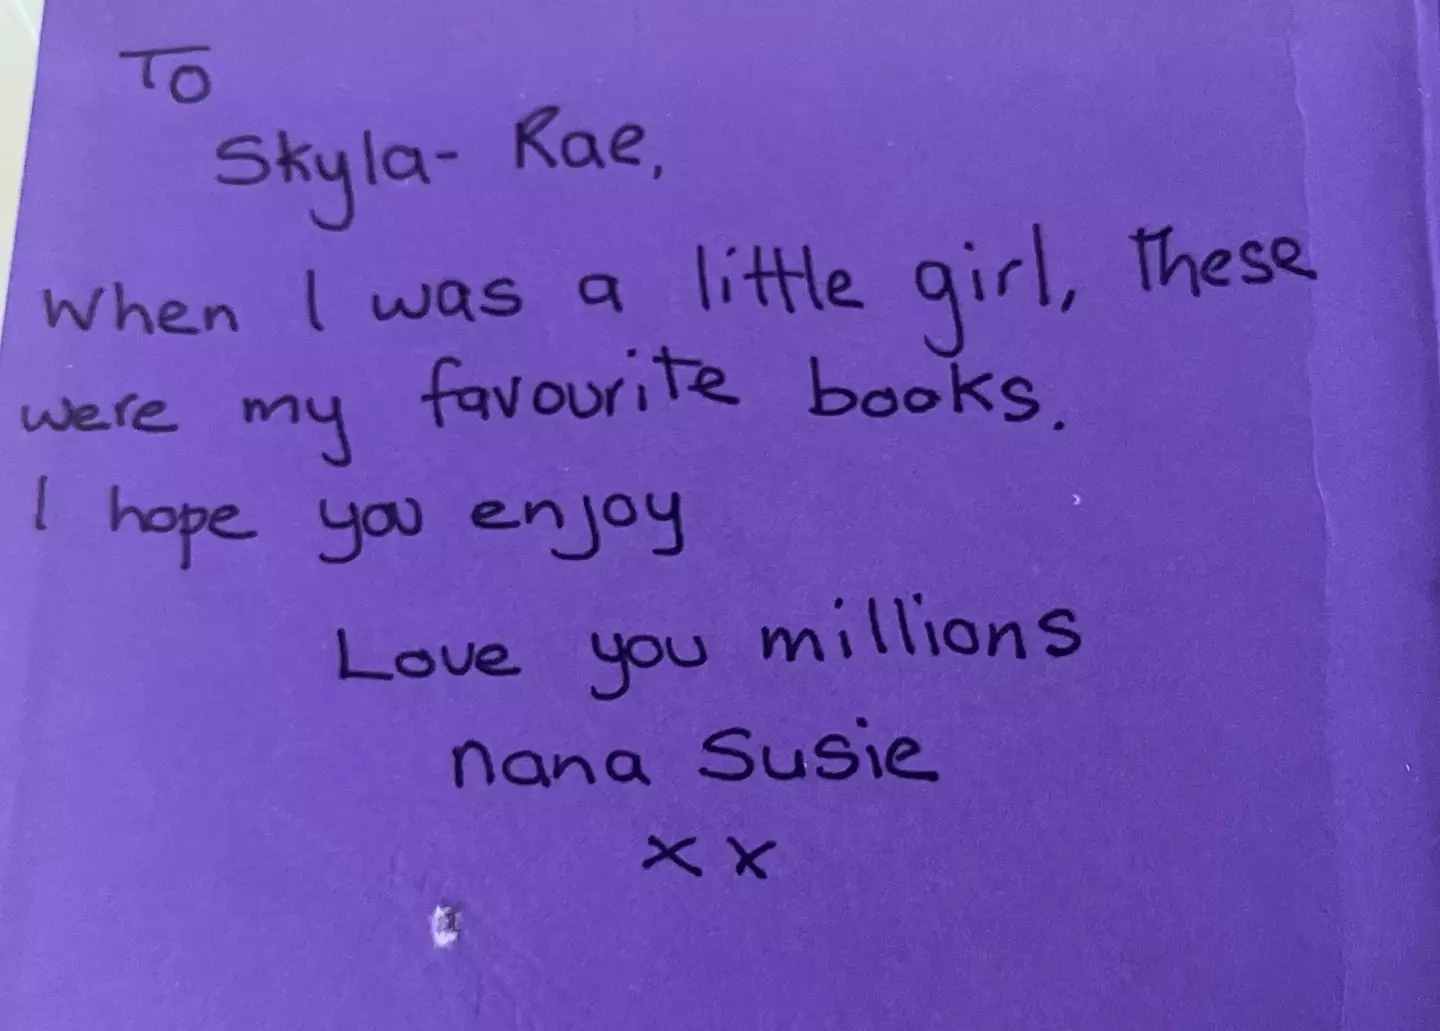 She even wrote a lovely note inside the cover.